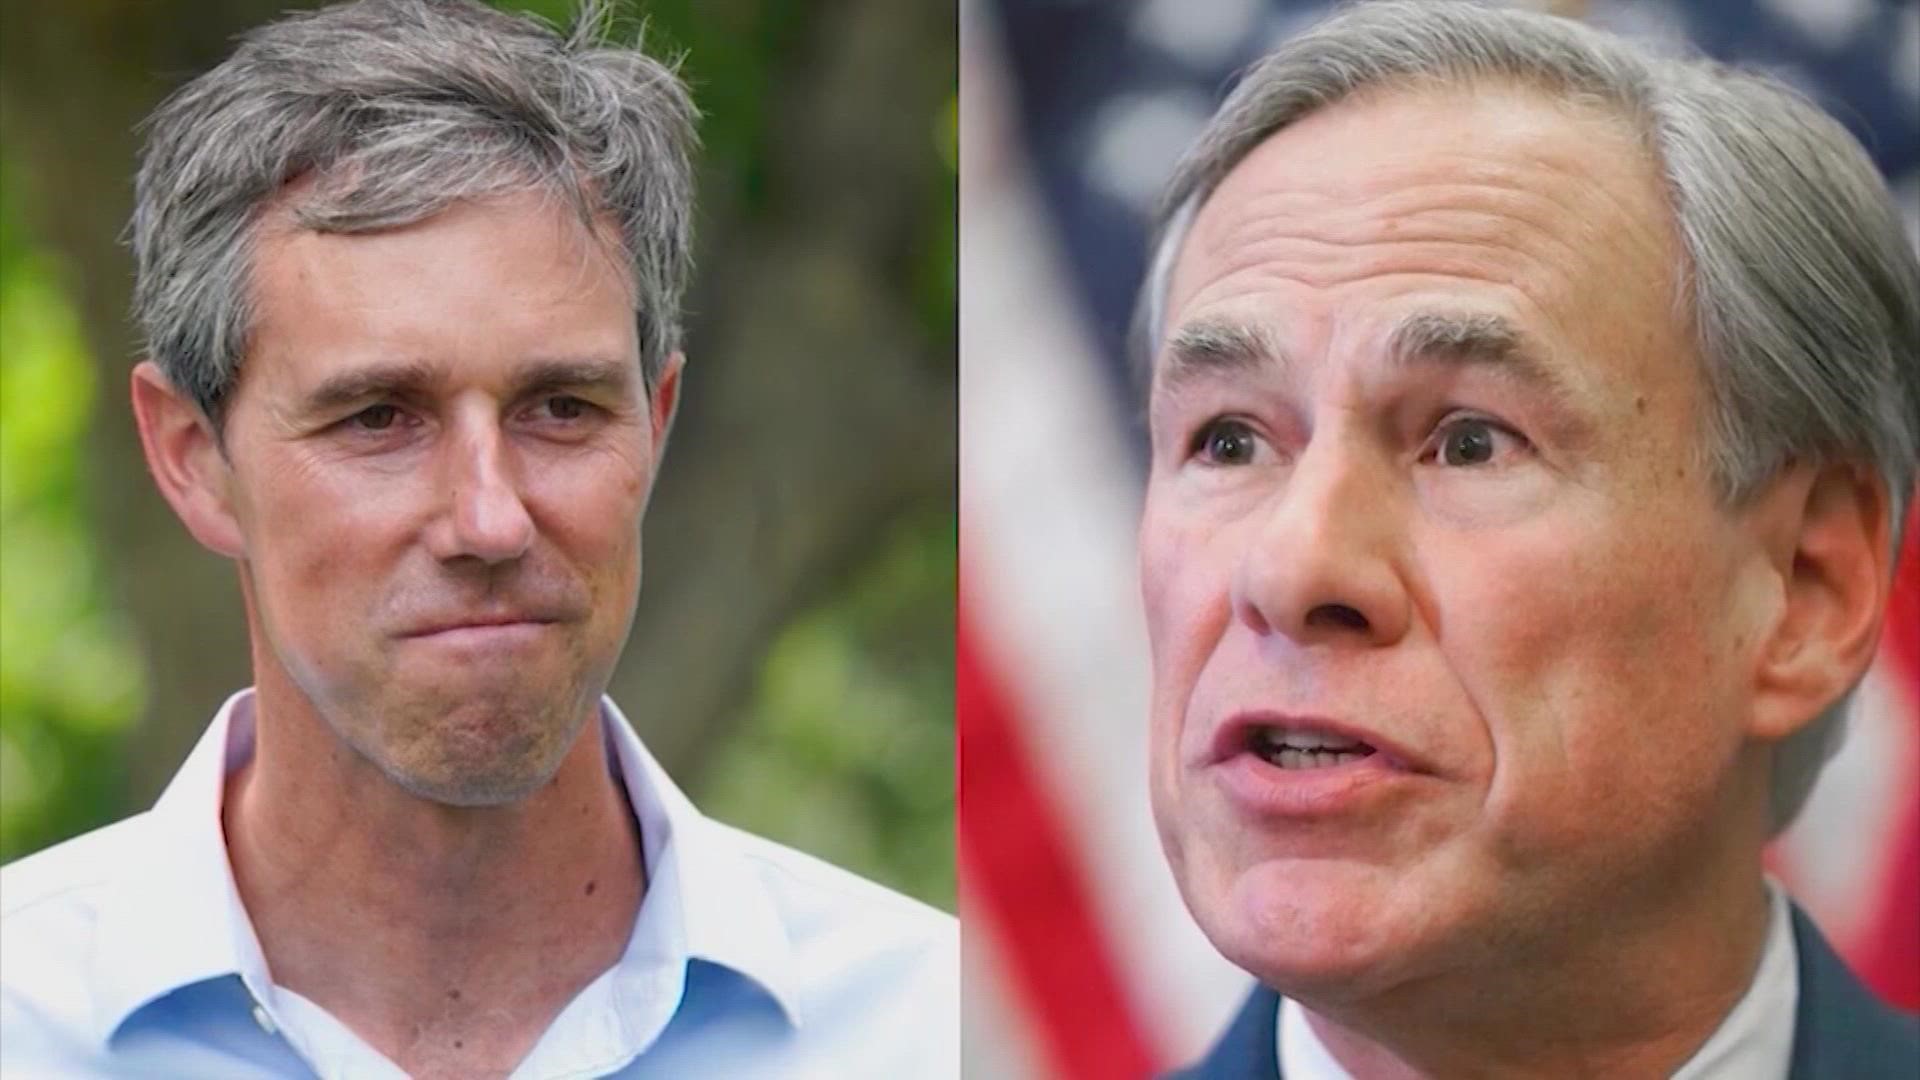 WFAA senior political reporter Jason Whitely breaks down the latest polling numbers for Gov. Greg Abbott and Beto O'Rourke and other key races.